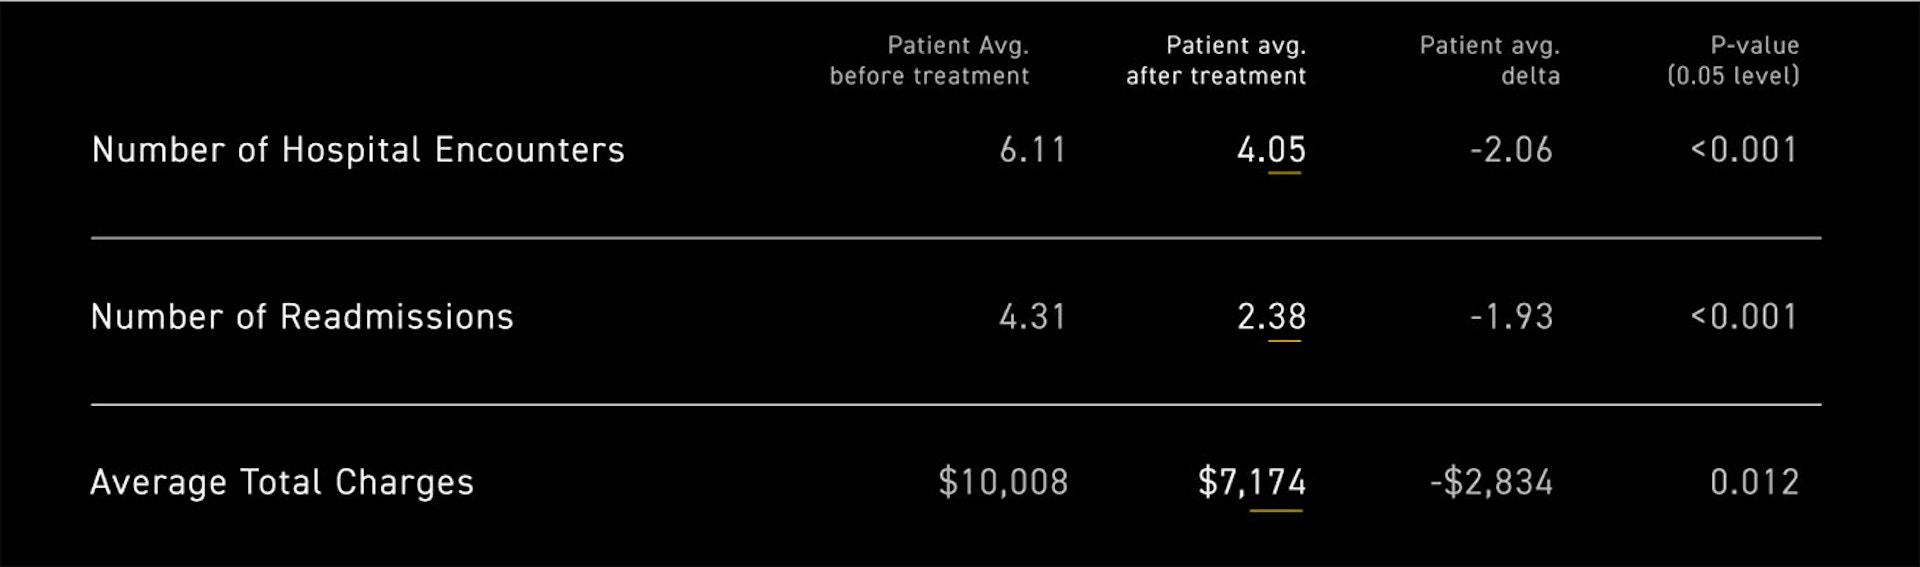 Data table from Maple Tree Cancer Alliance showing the difference in average dollar amount charged to patients before and after treatment